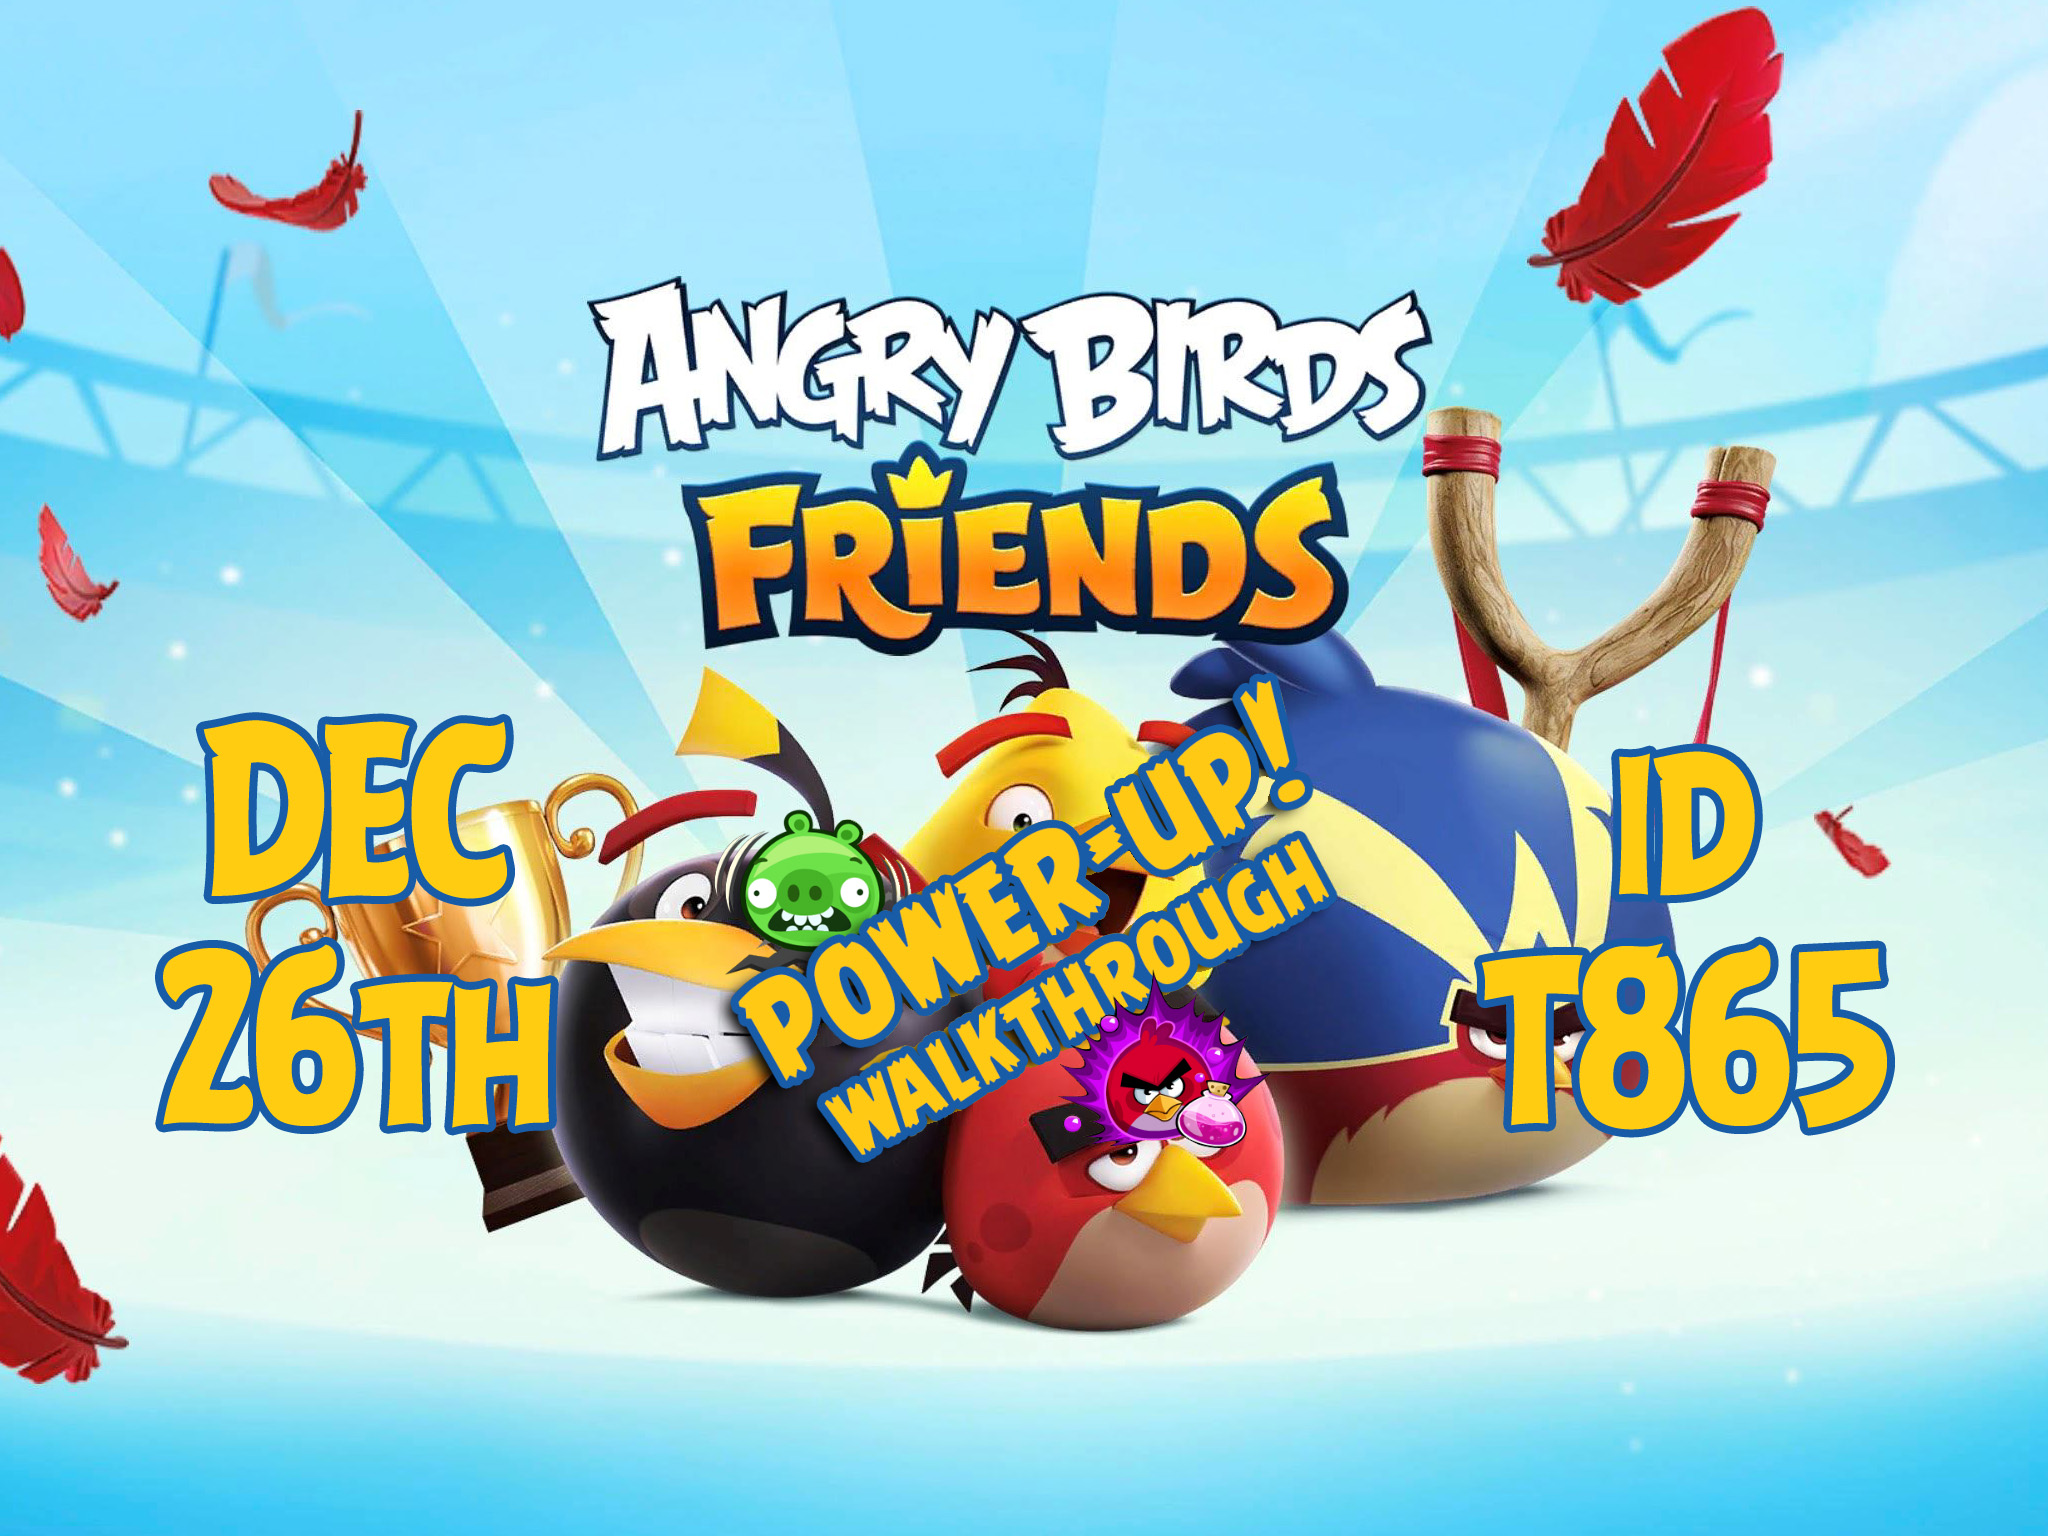 Angry-Birds-Friends-Tournament-T865-Feature-Image-PU